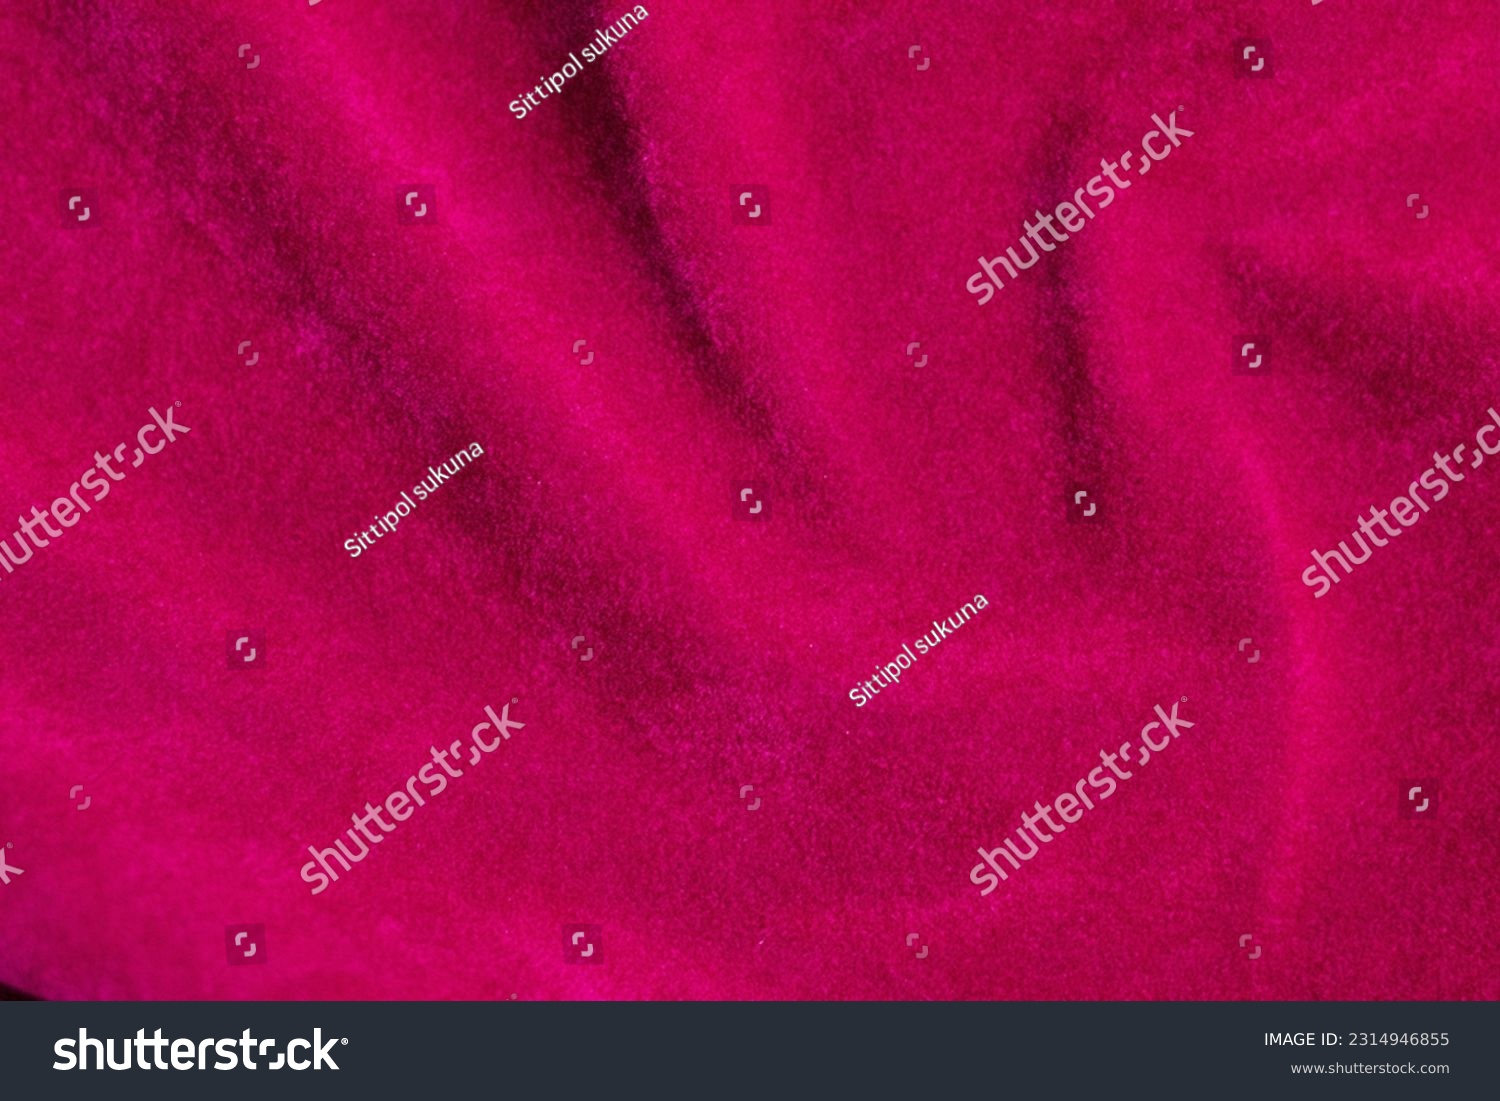 Pink velvet fabric texture used as background. pink fabric background of soft and smooth textile material. There is space for text.	 #2314946855